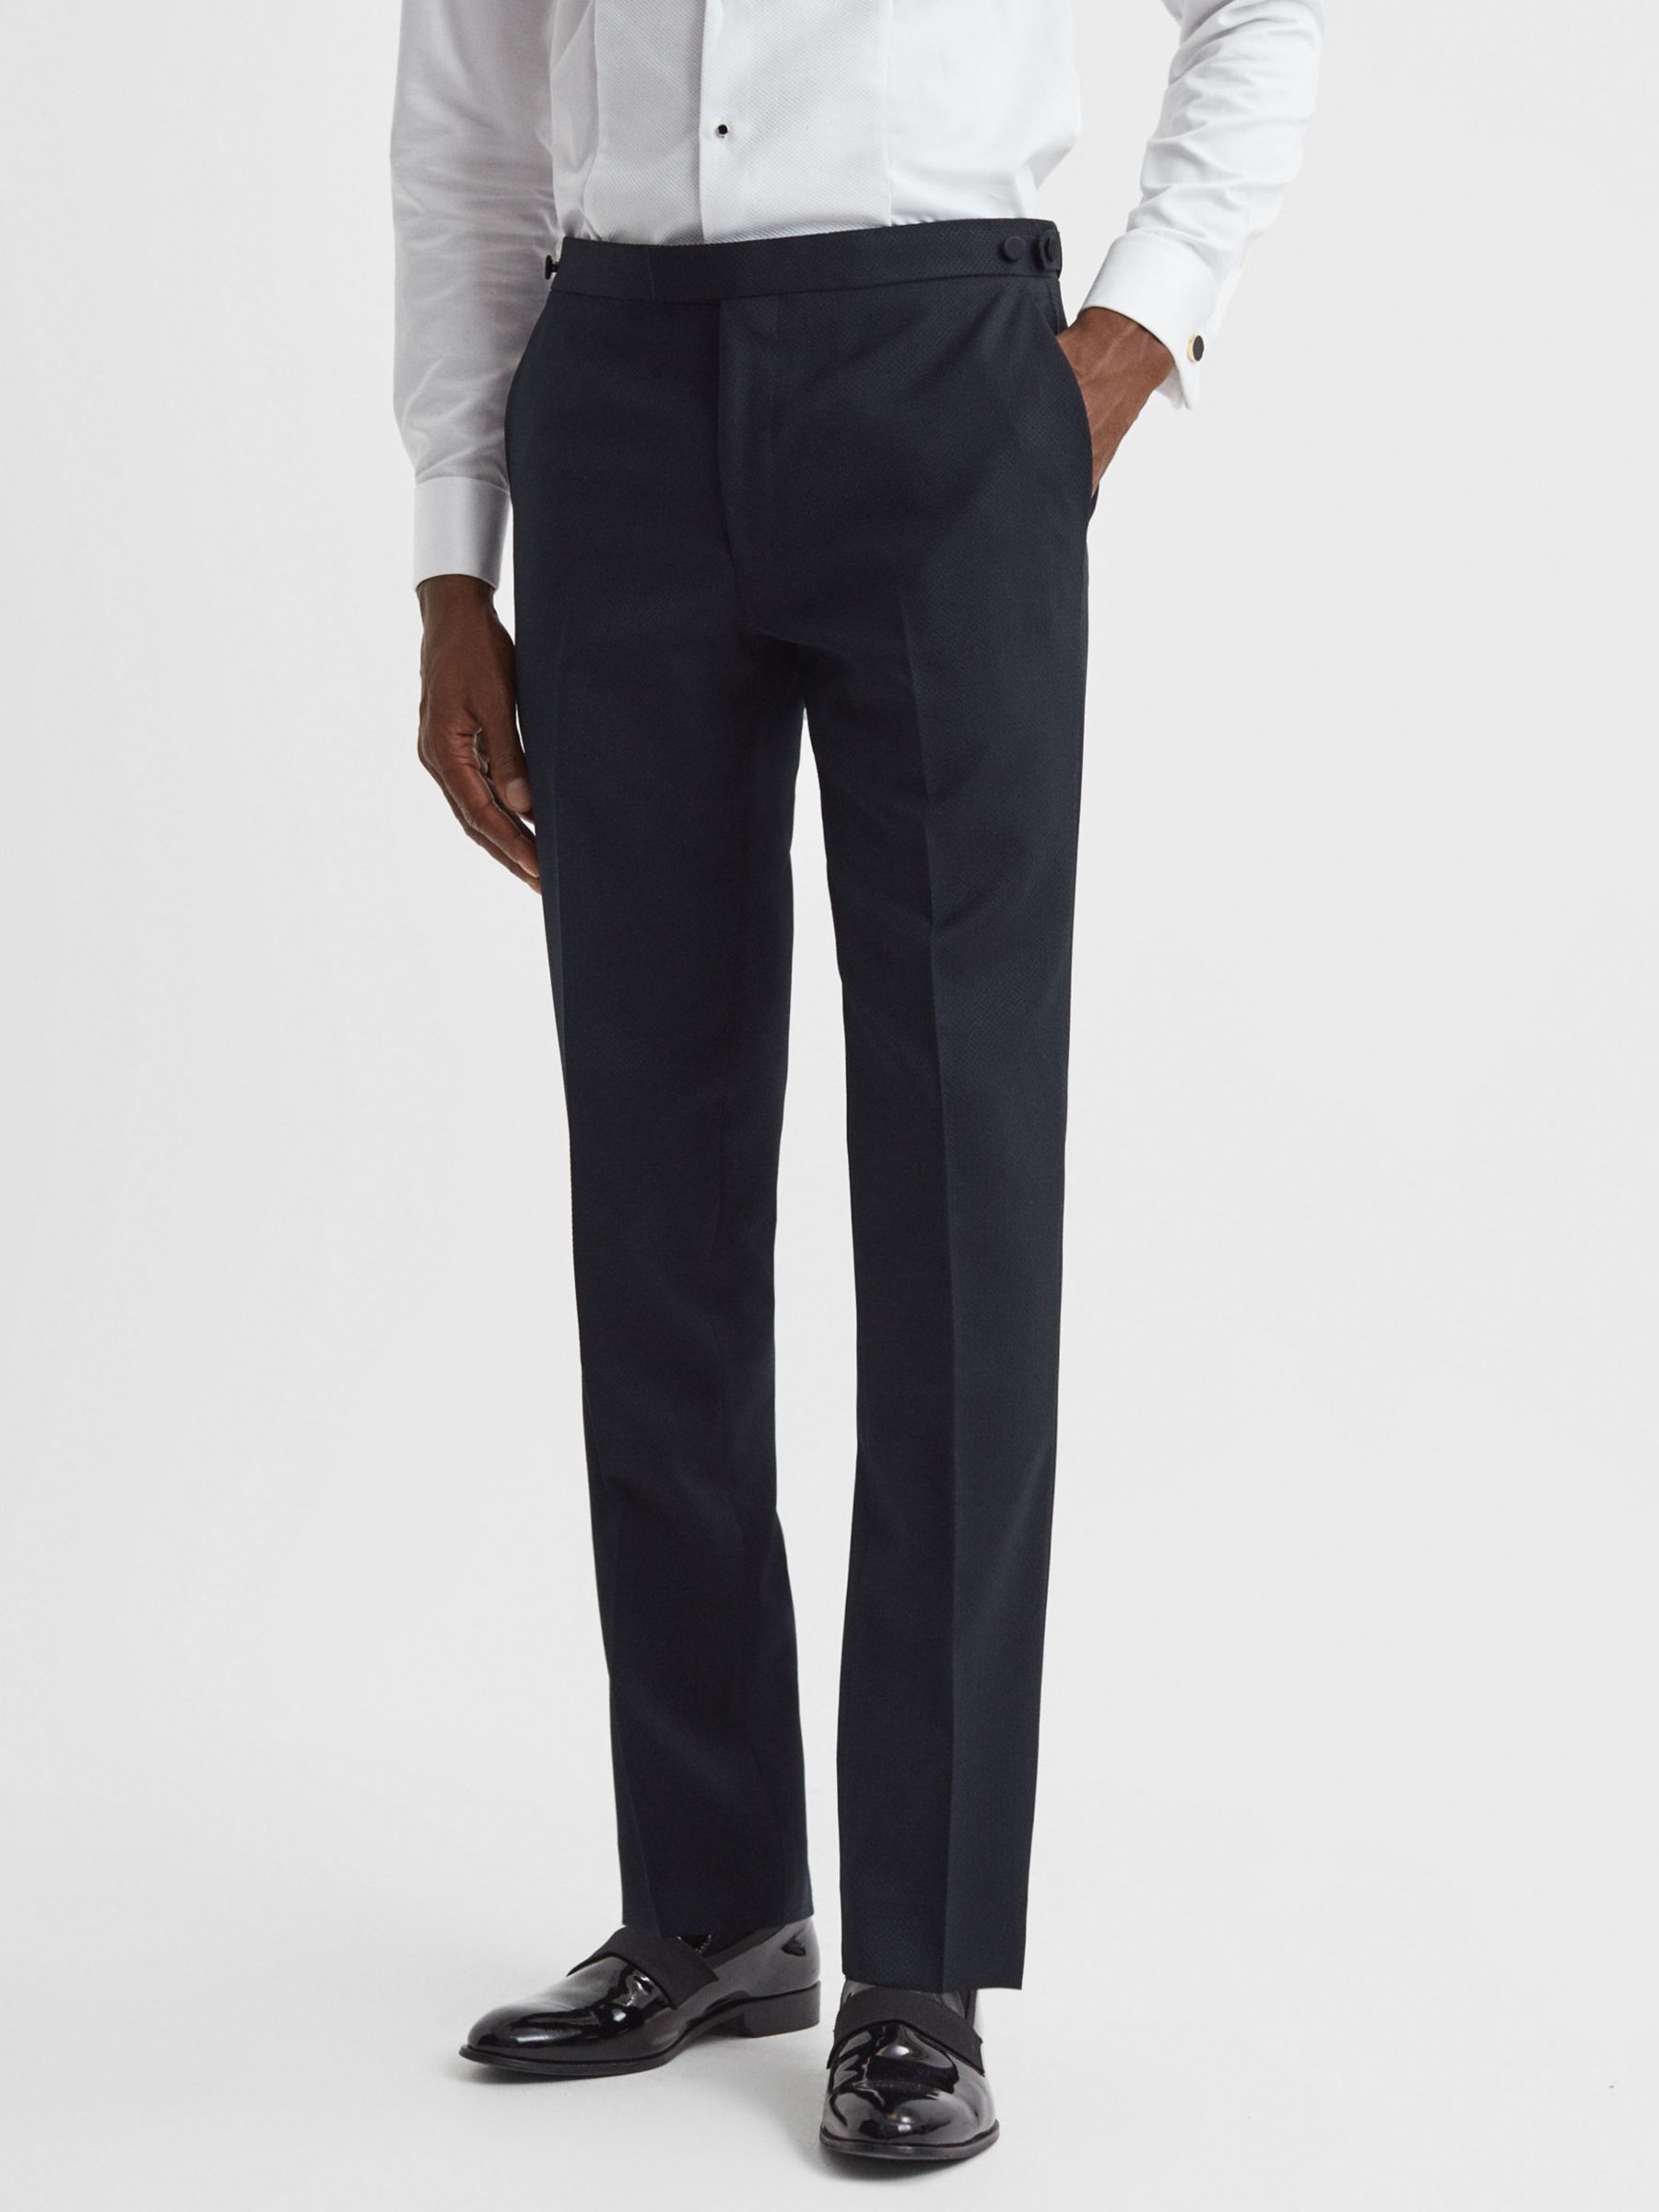 Dior Icons Track Pants Gray Cashmere and Wool Jacquard